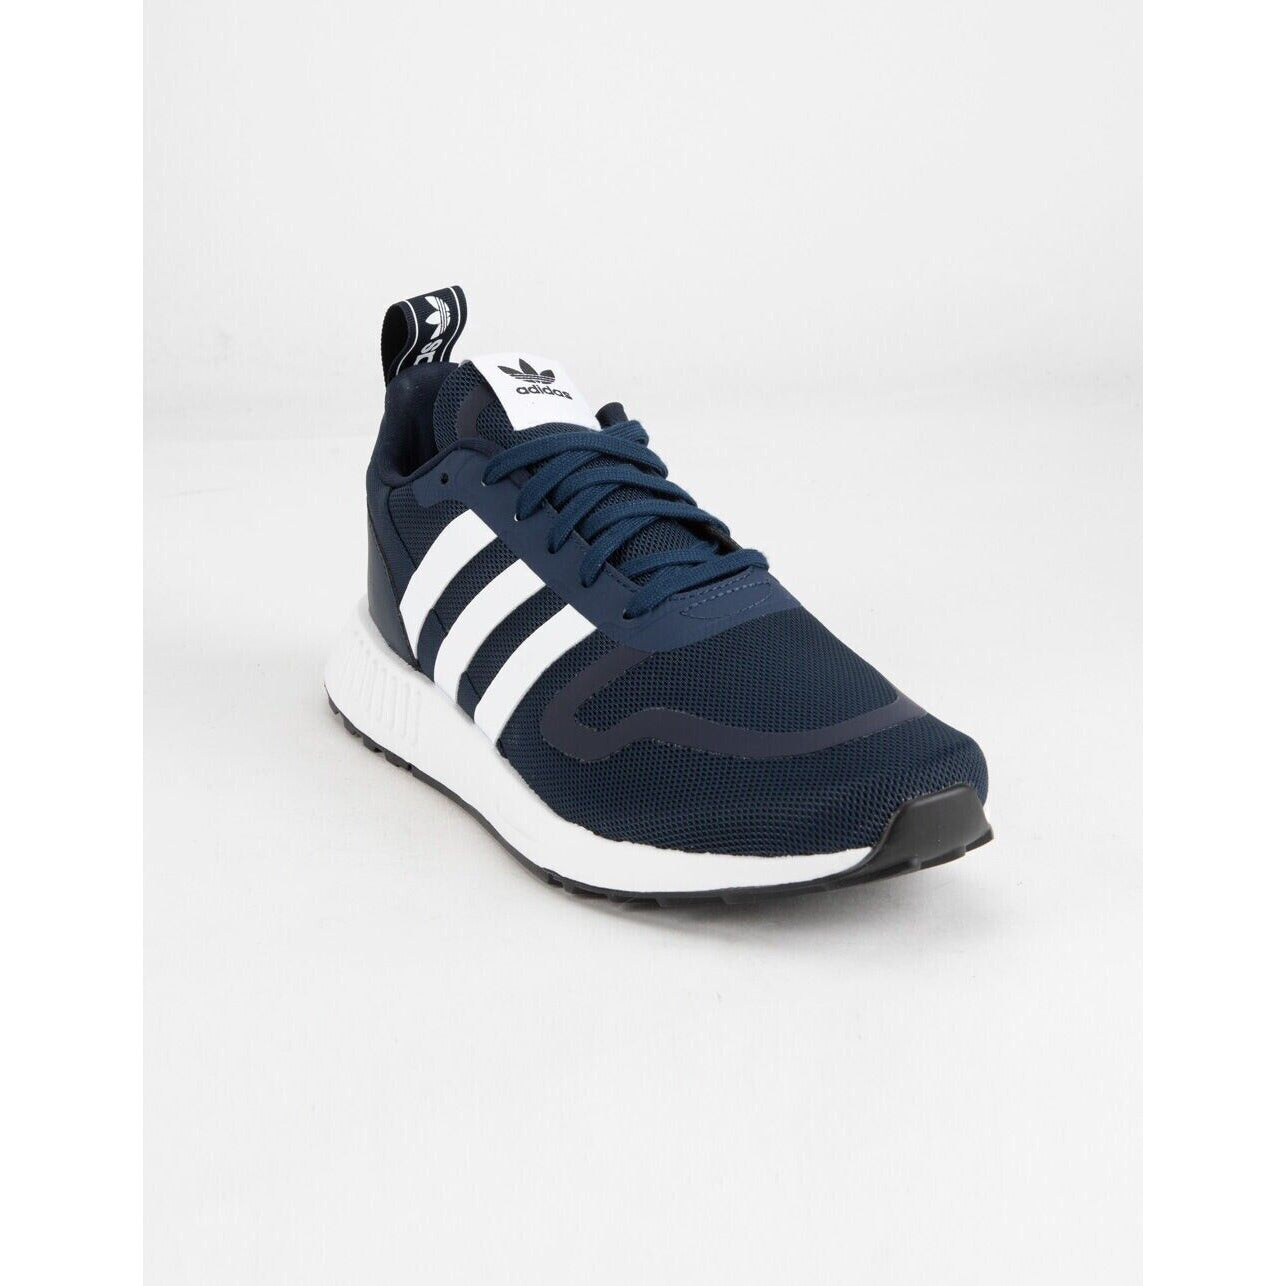 Forum low faux leather lace-up sneakers - adidas Originals - Girls |  Luisaviaroma